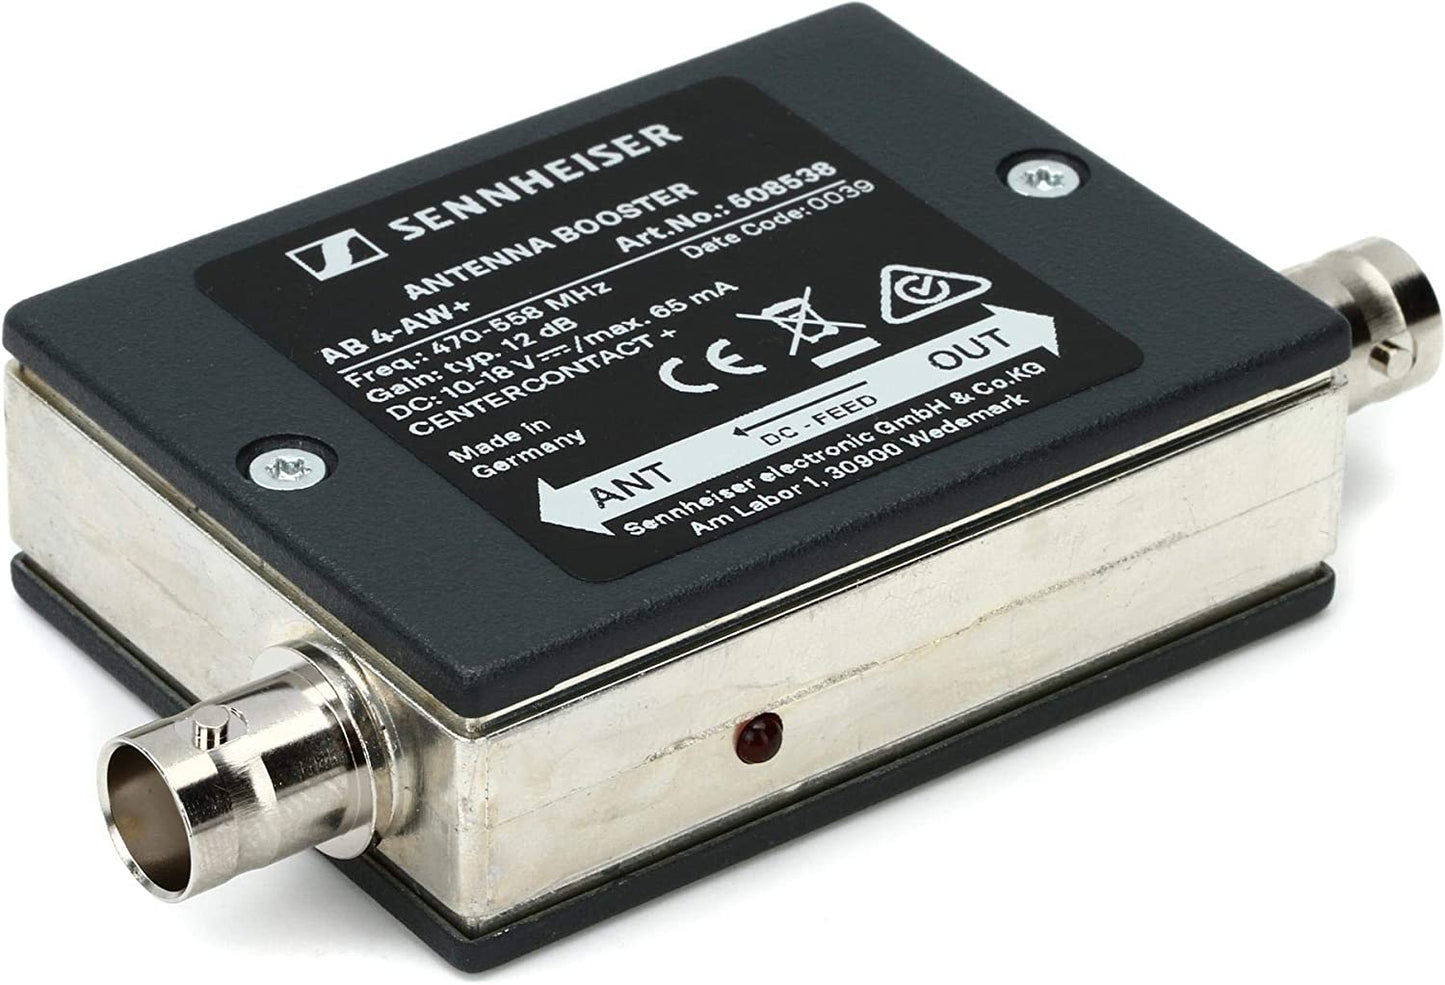 Sennheiser AB4-AW+ Inline Antenna Booster 470MHz to 558MHz with BNC Connectors Metal Housing for Signal Loss Compensation